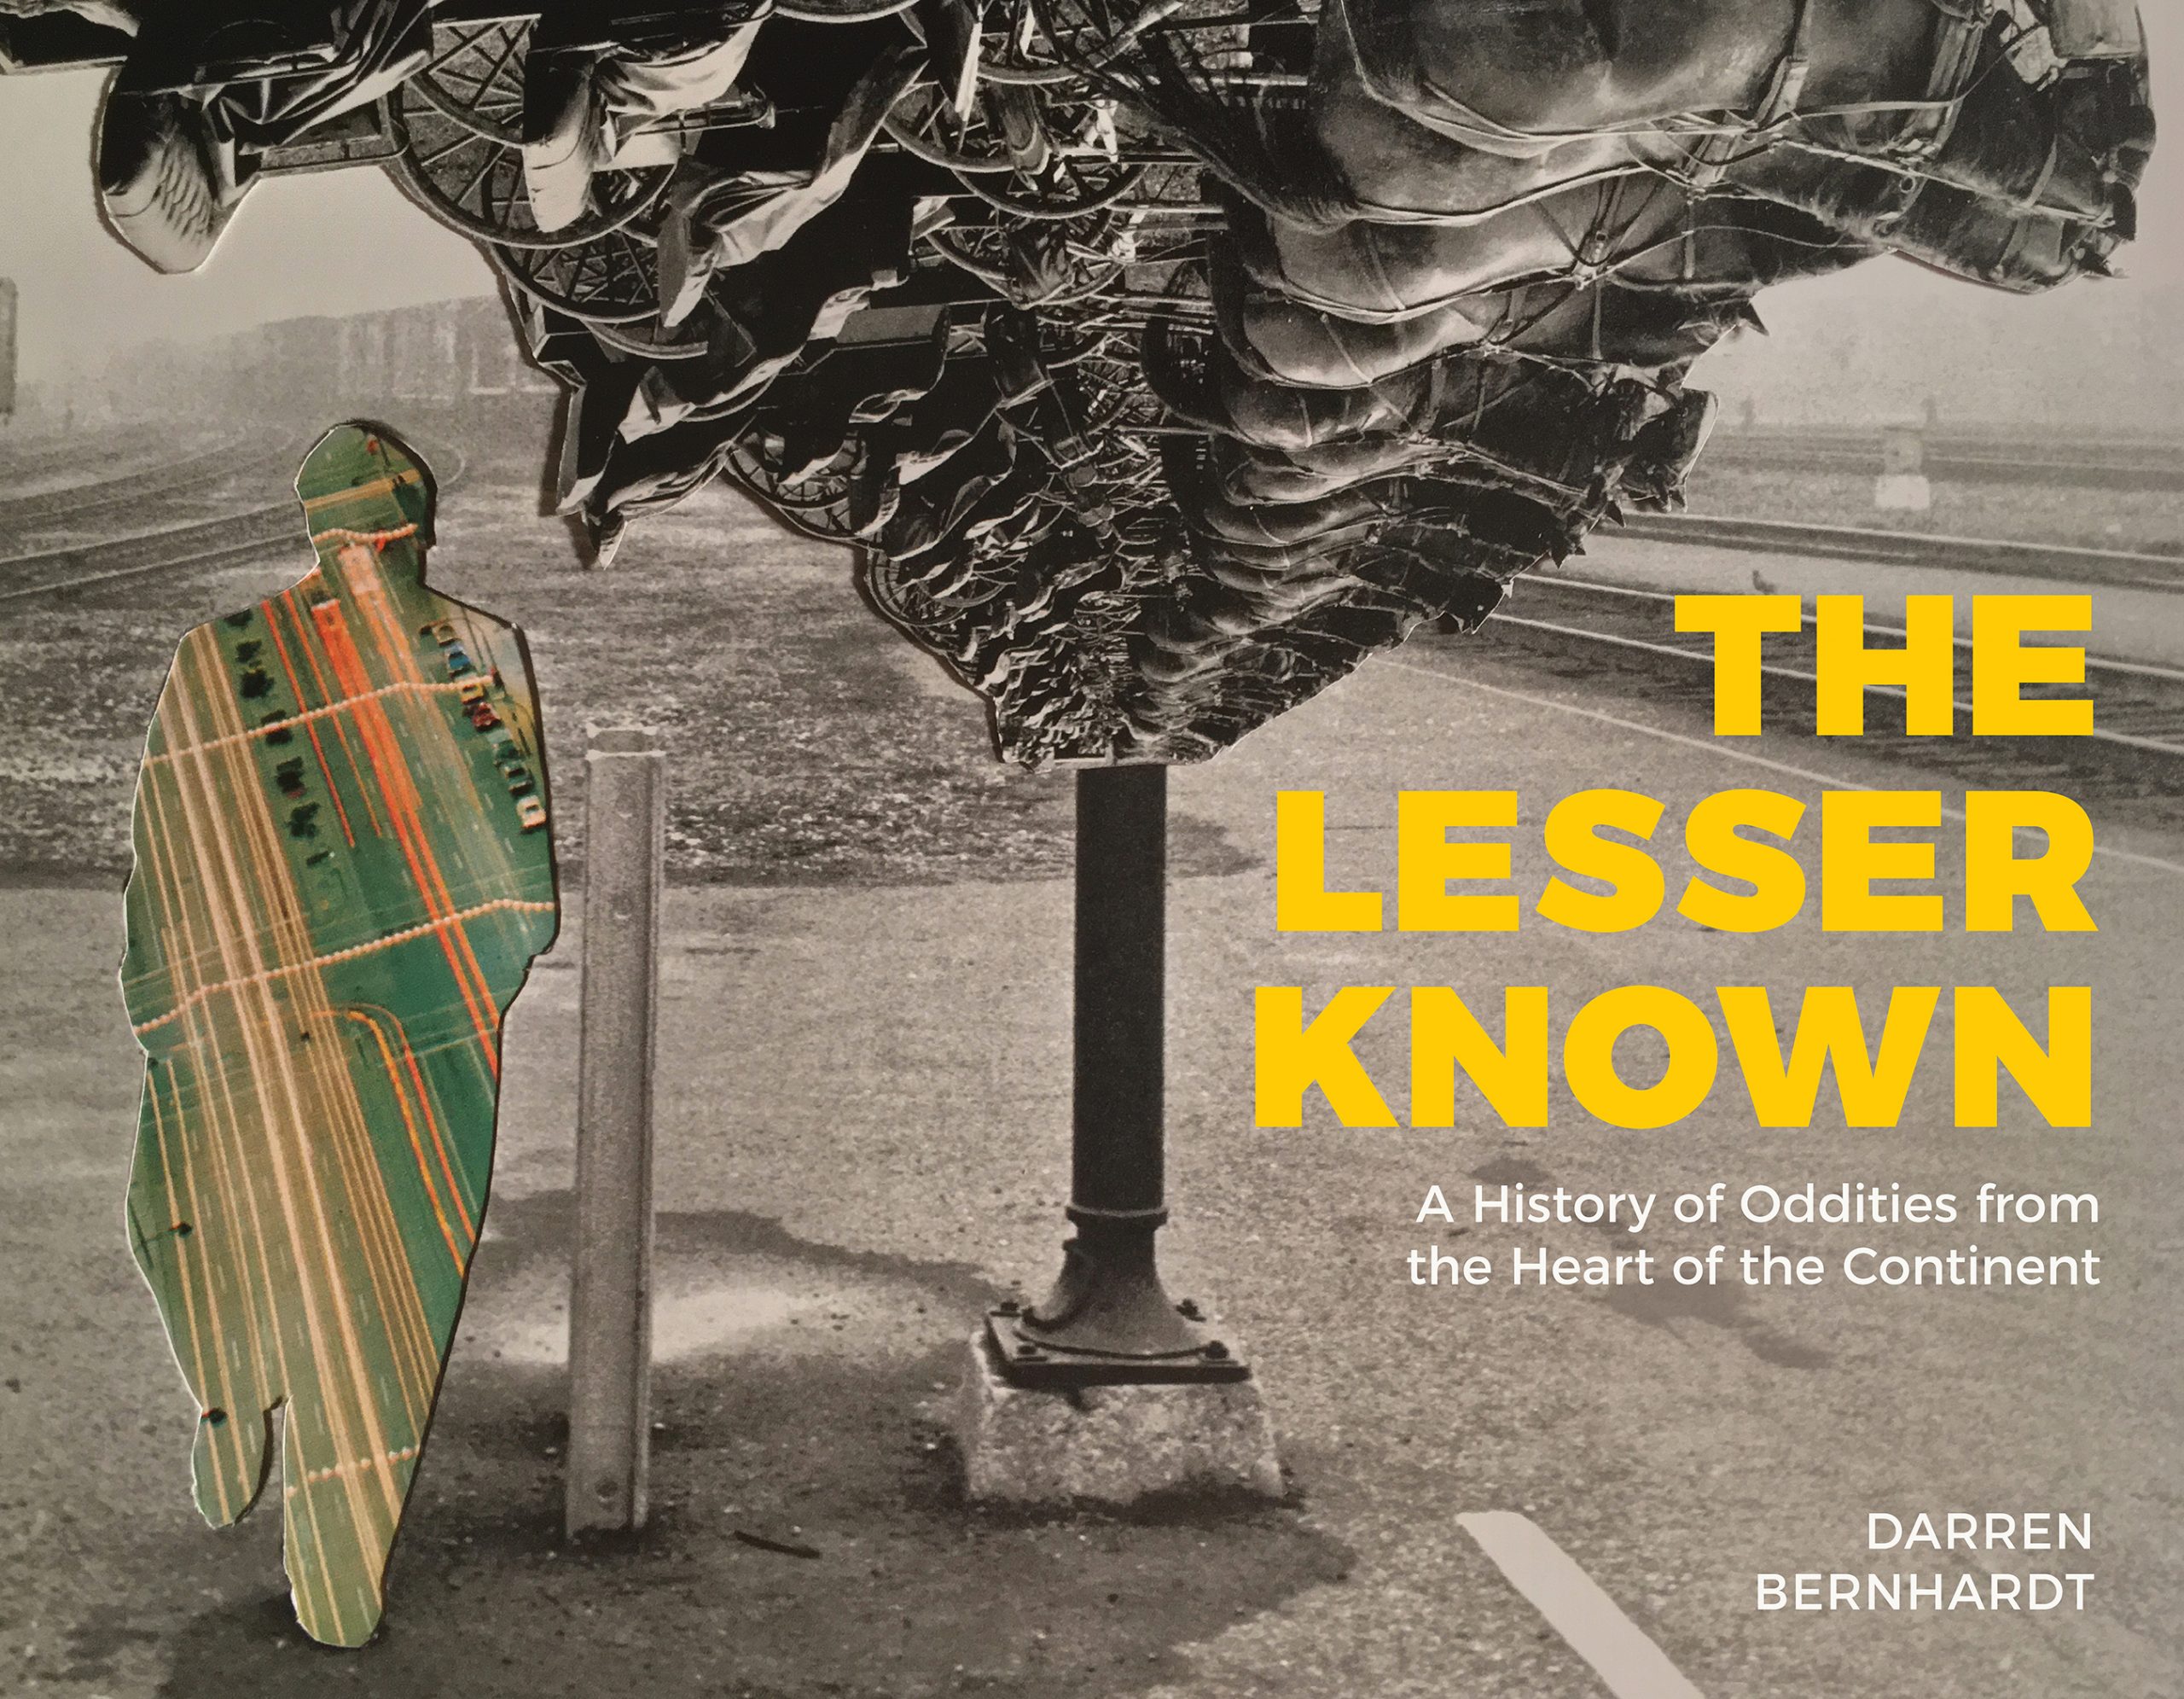 The Lesser Known: A History of Oddities from the Heart of the Continent